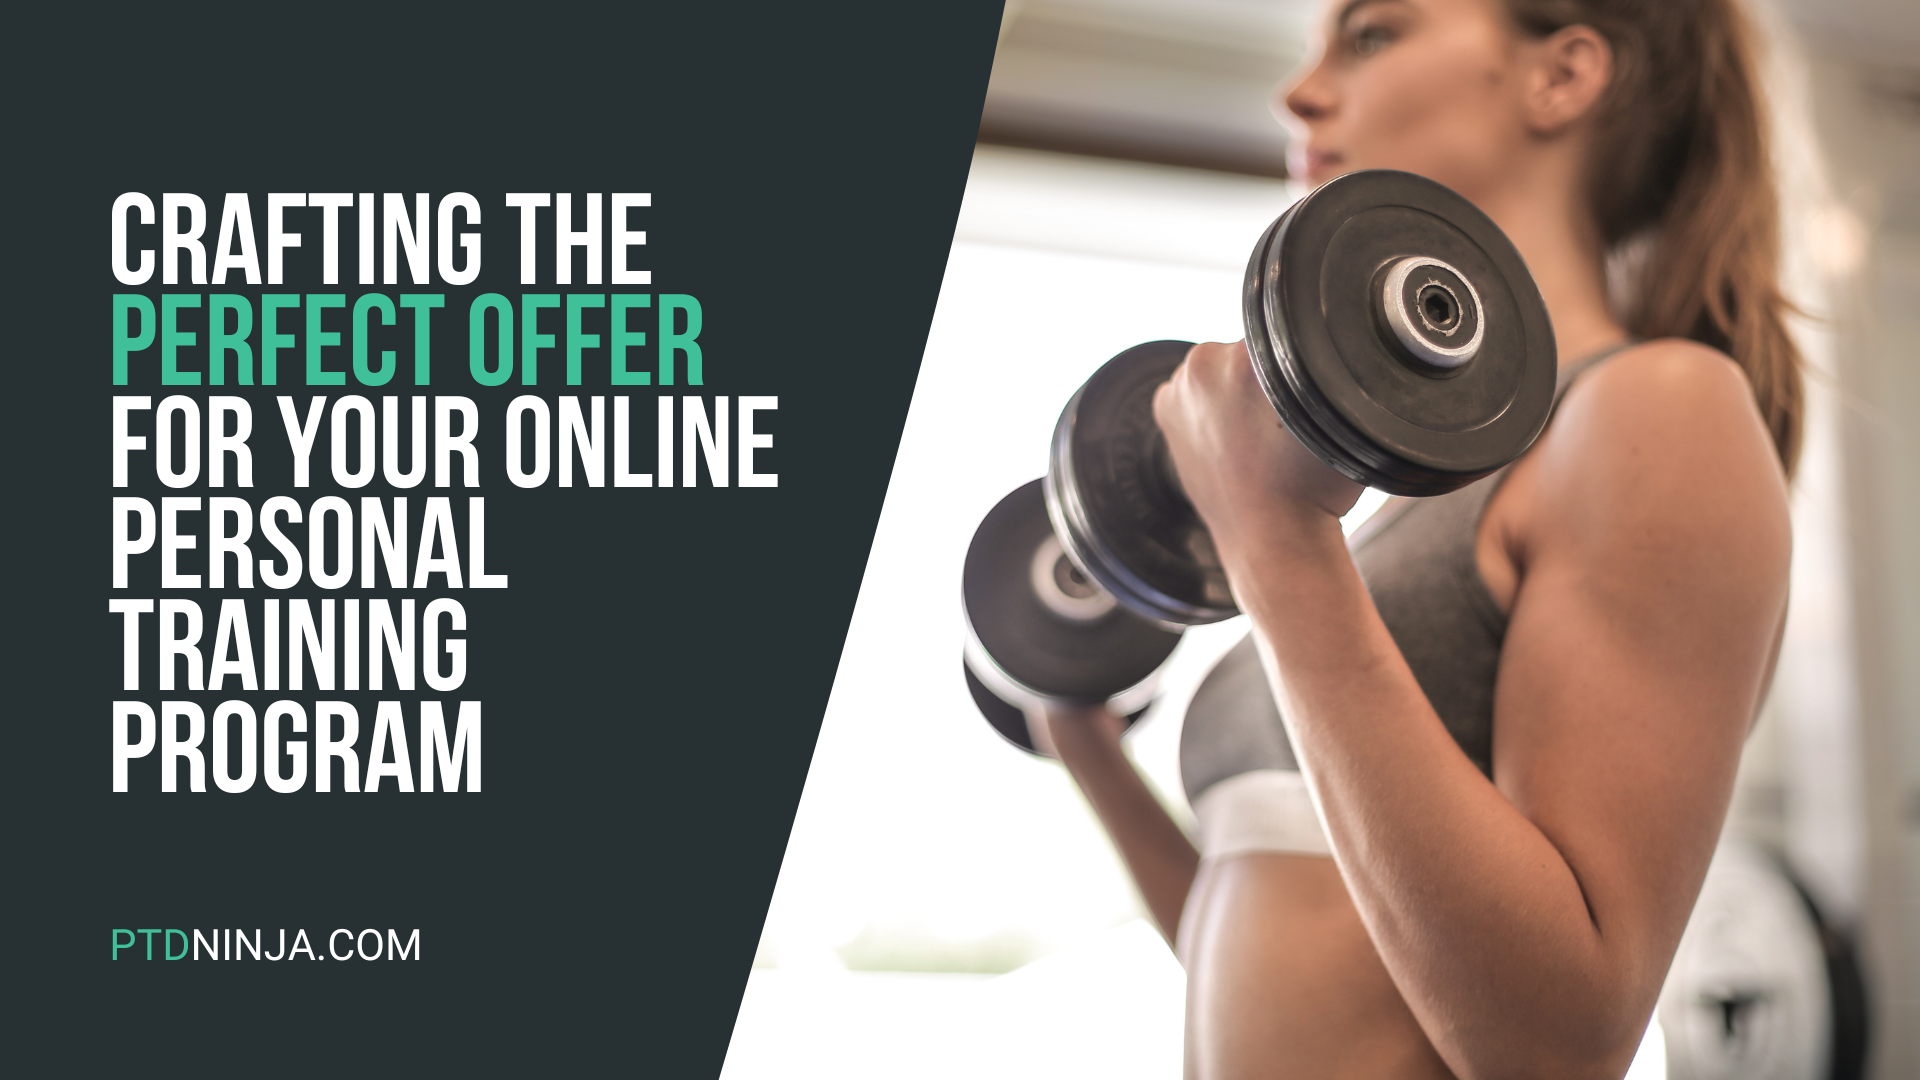 Crafting the Perfect Offer for Your Online Personal Training Program: A Step-by-Step Guide<br />
